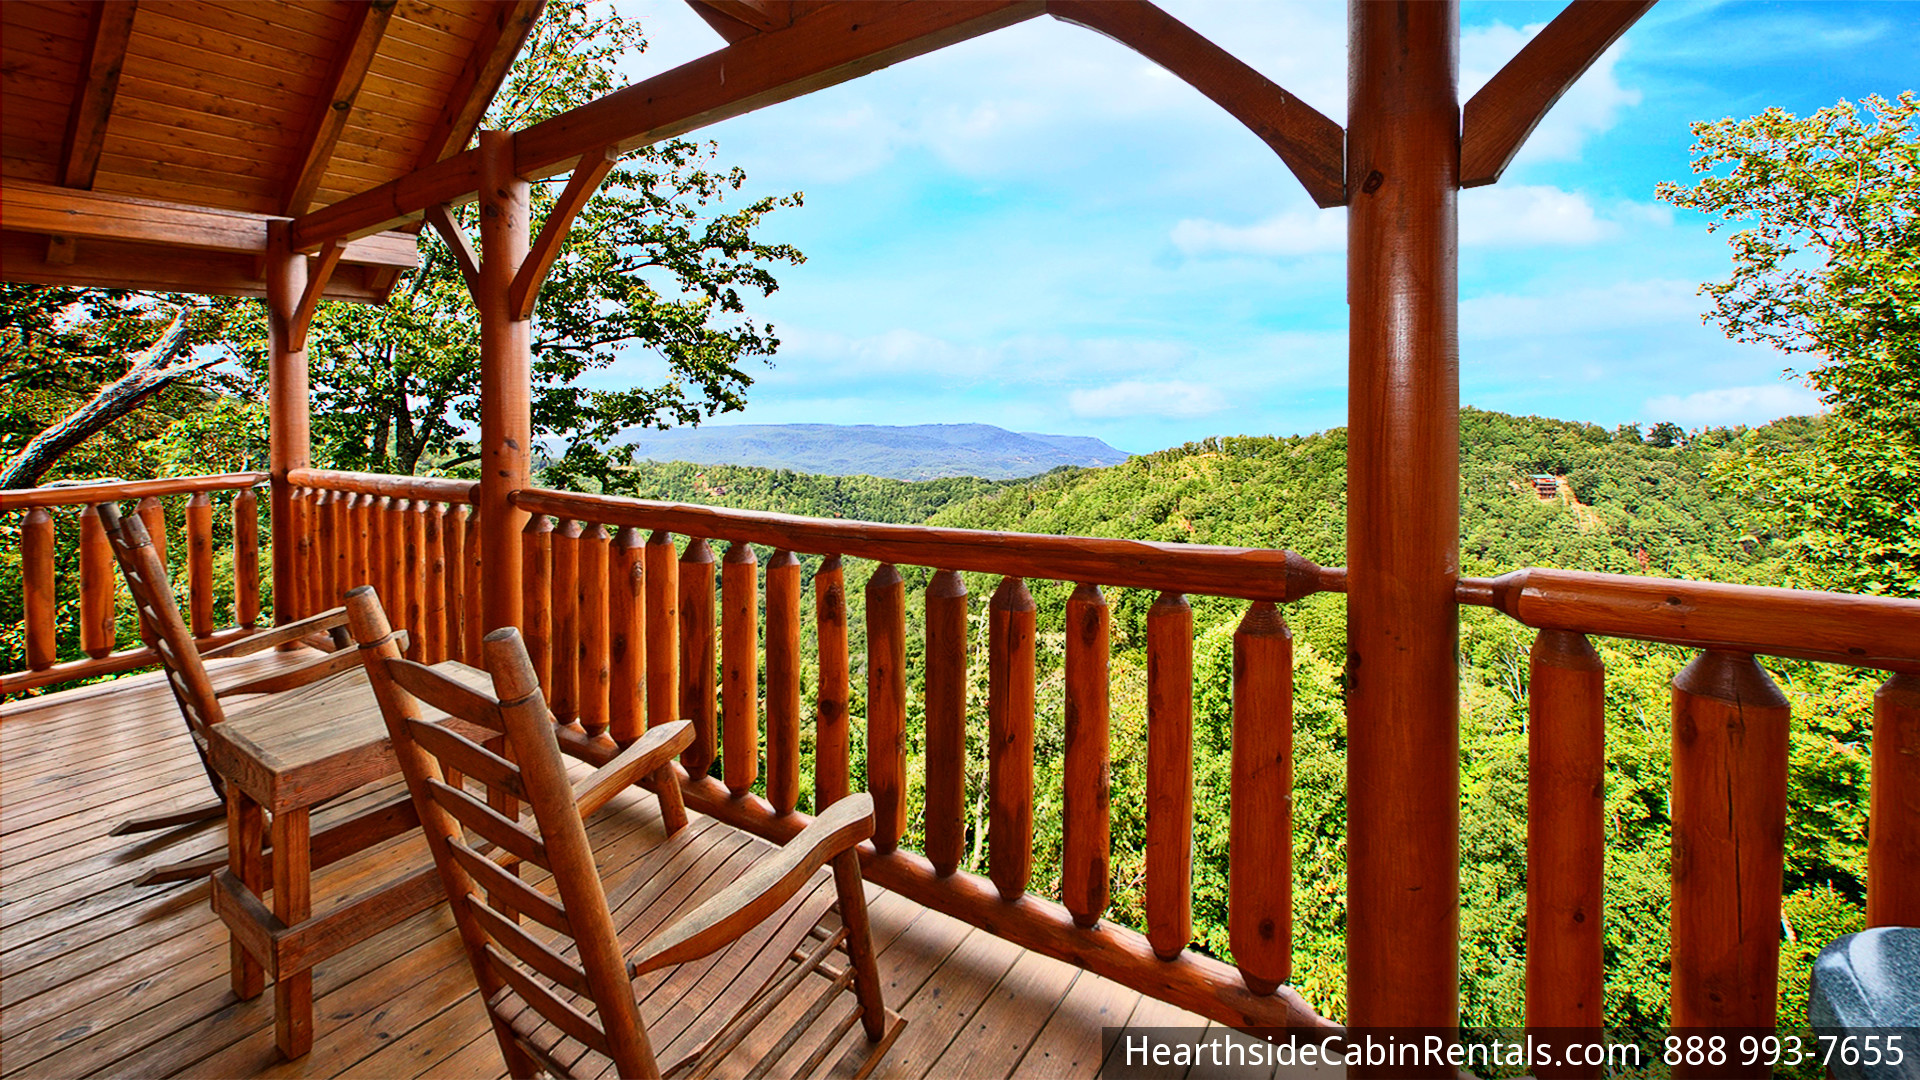 Guests visiting the Great Smoky Mountains National Park will enjoy the unparalleled panoramic views Hearthside Cabin Rentals' Pigeon Forge and Gatlinburg cabins provide.